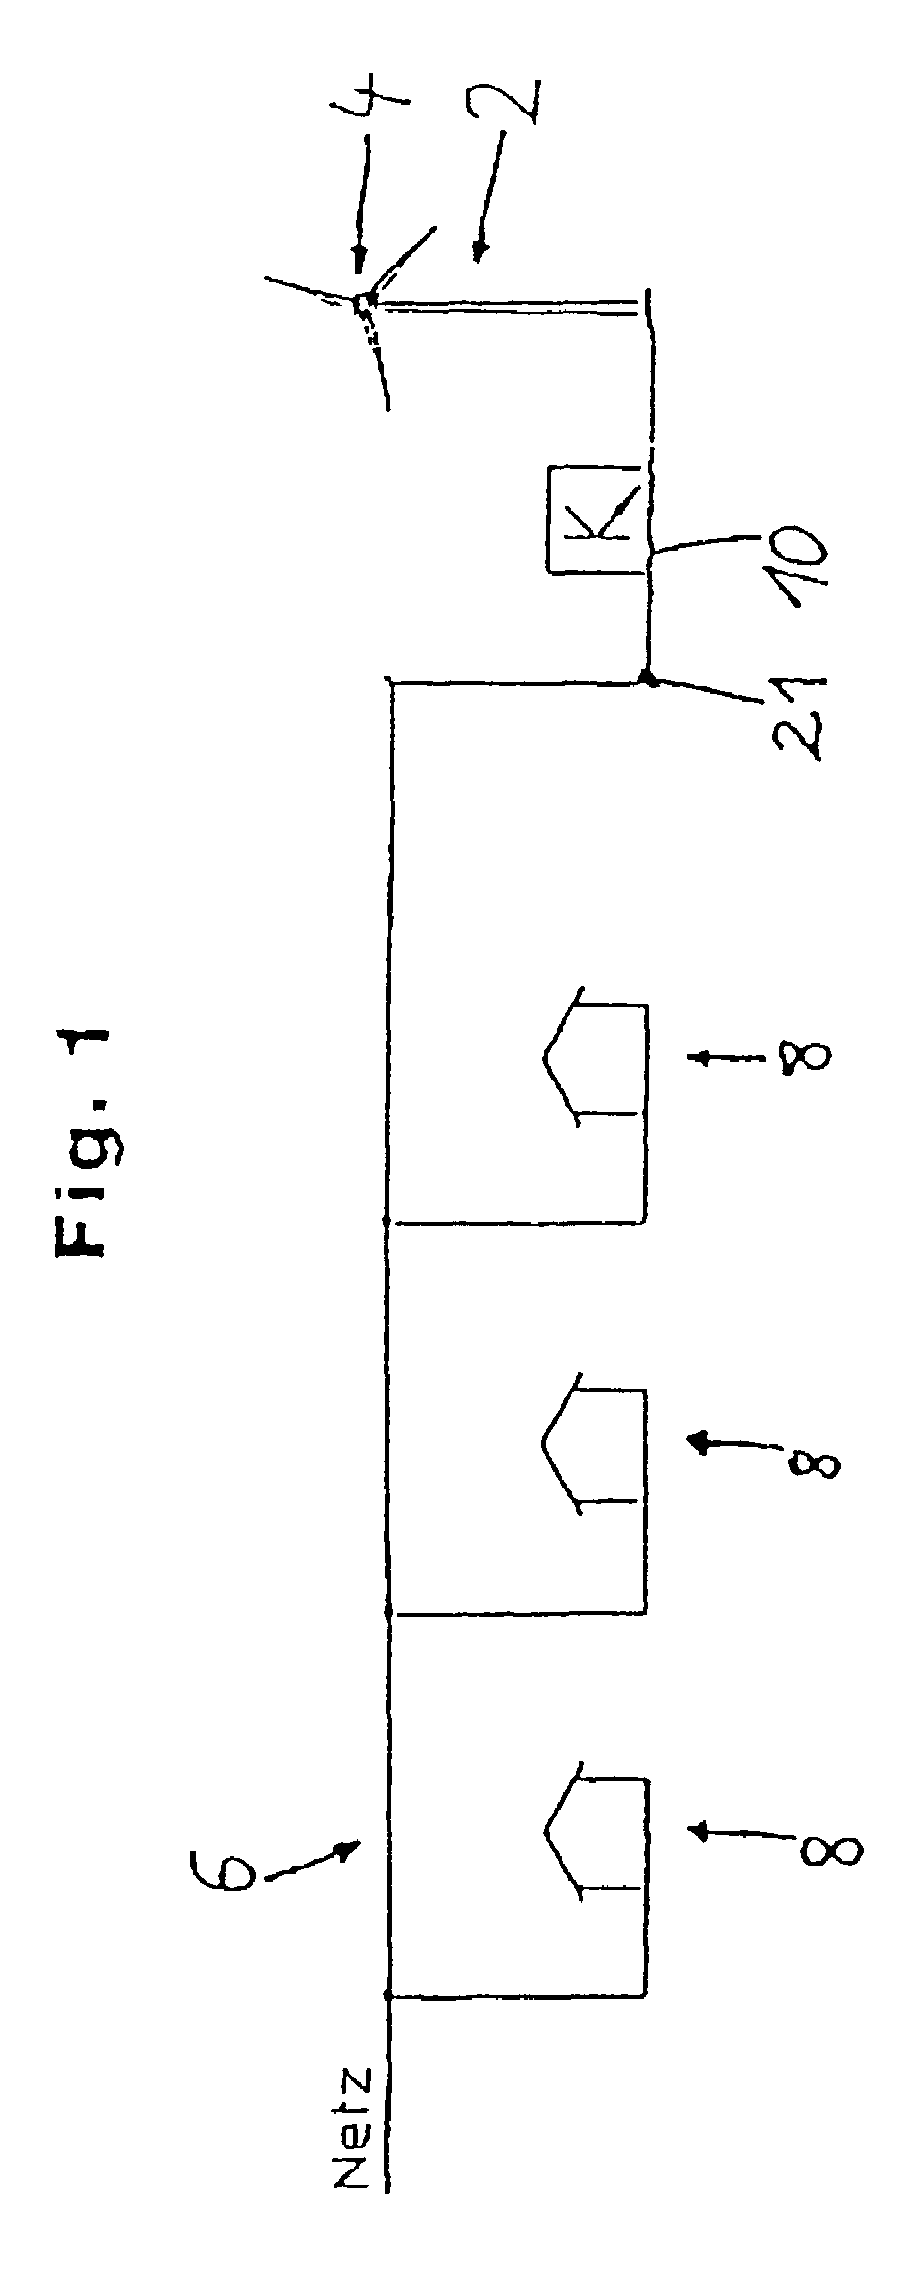 Method for operating a wind energy plant